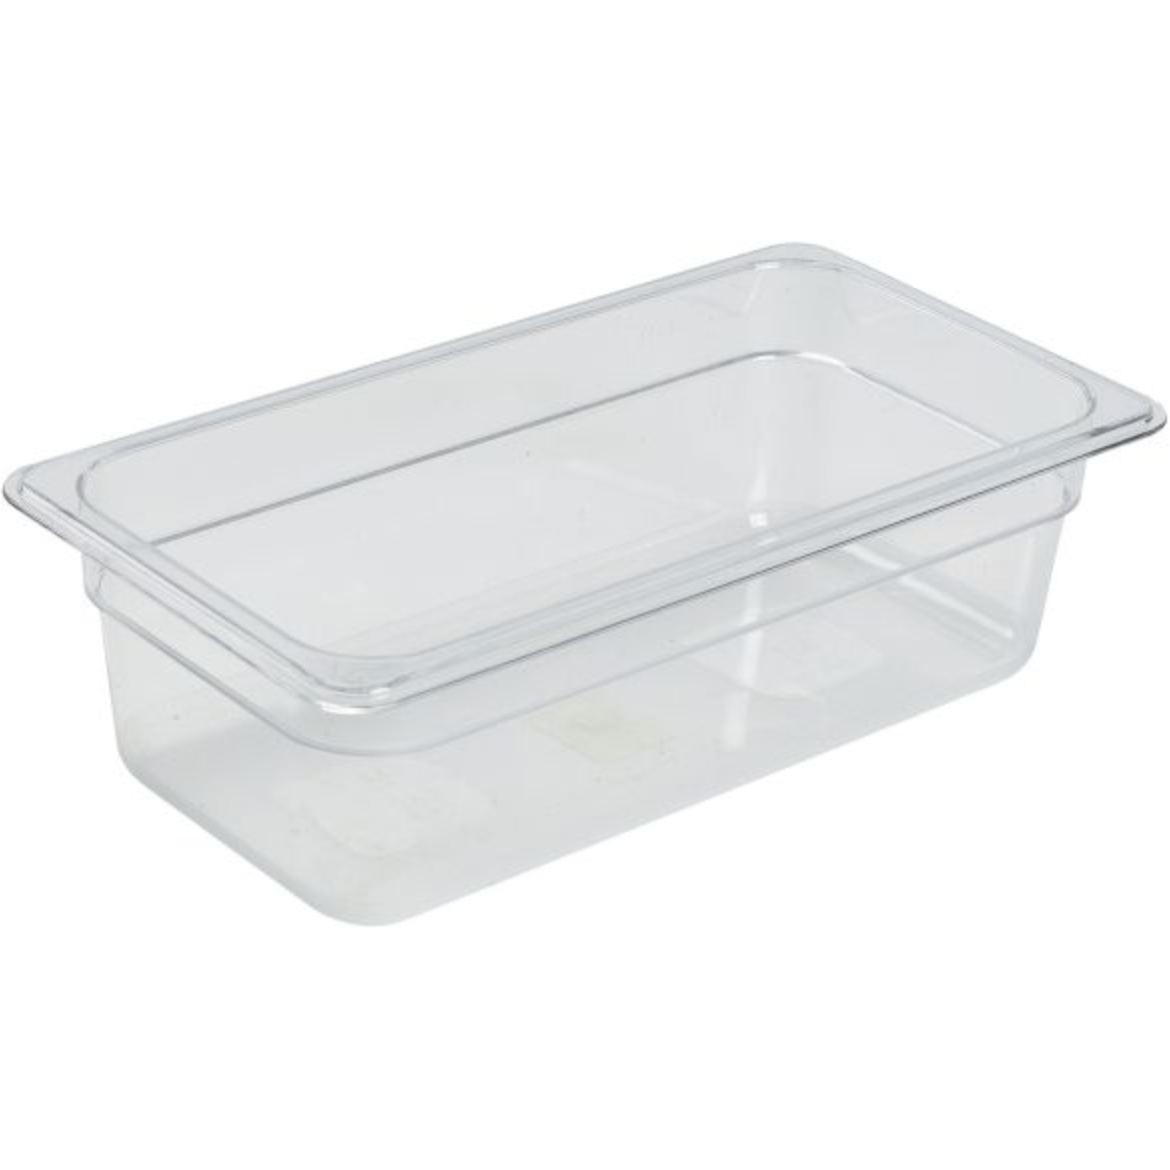 GenWare 1/3 -Polycarbonate GN Pan 100mm Clear